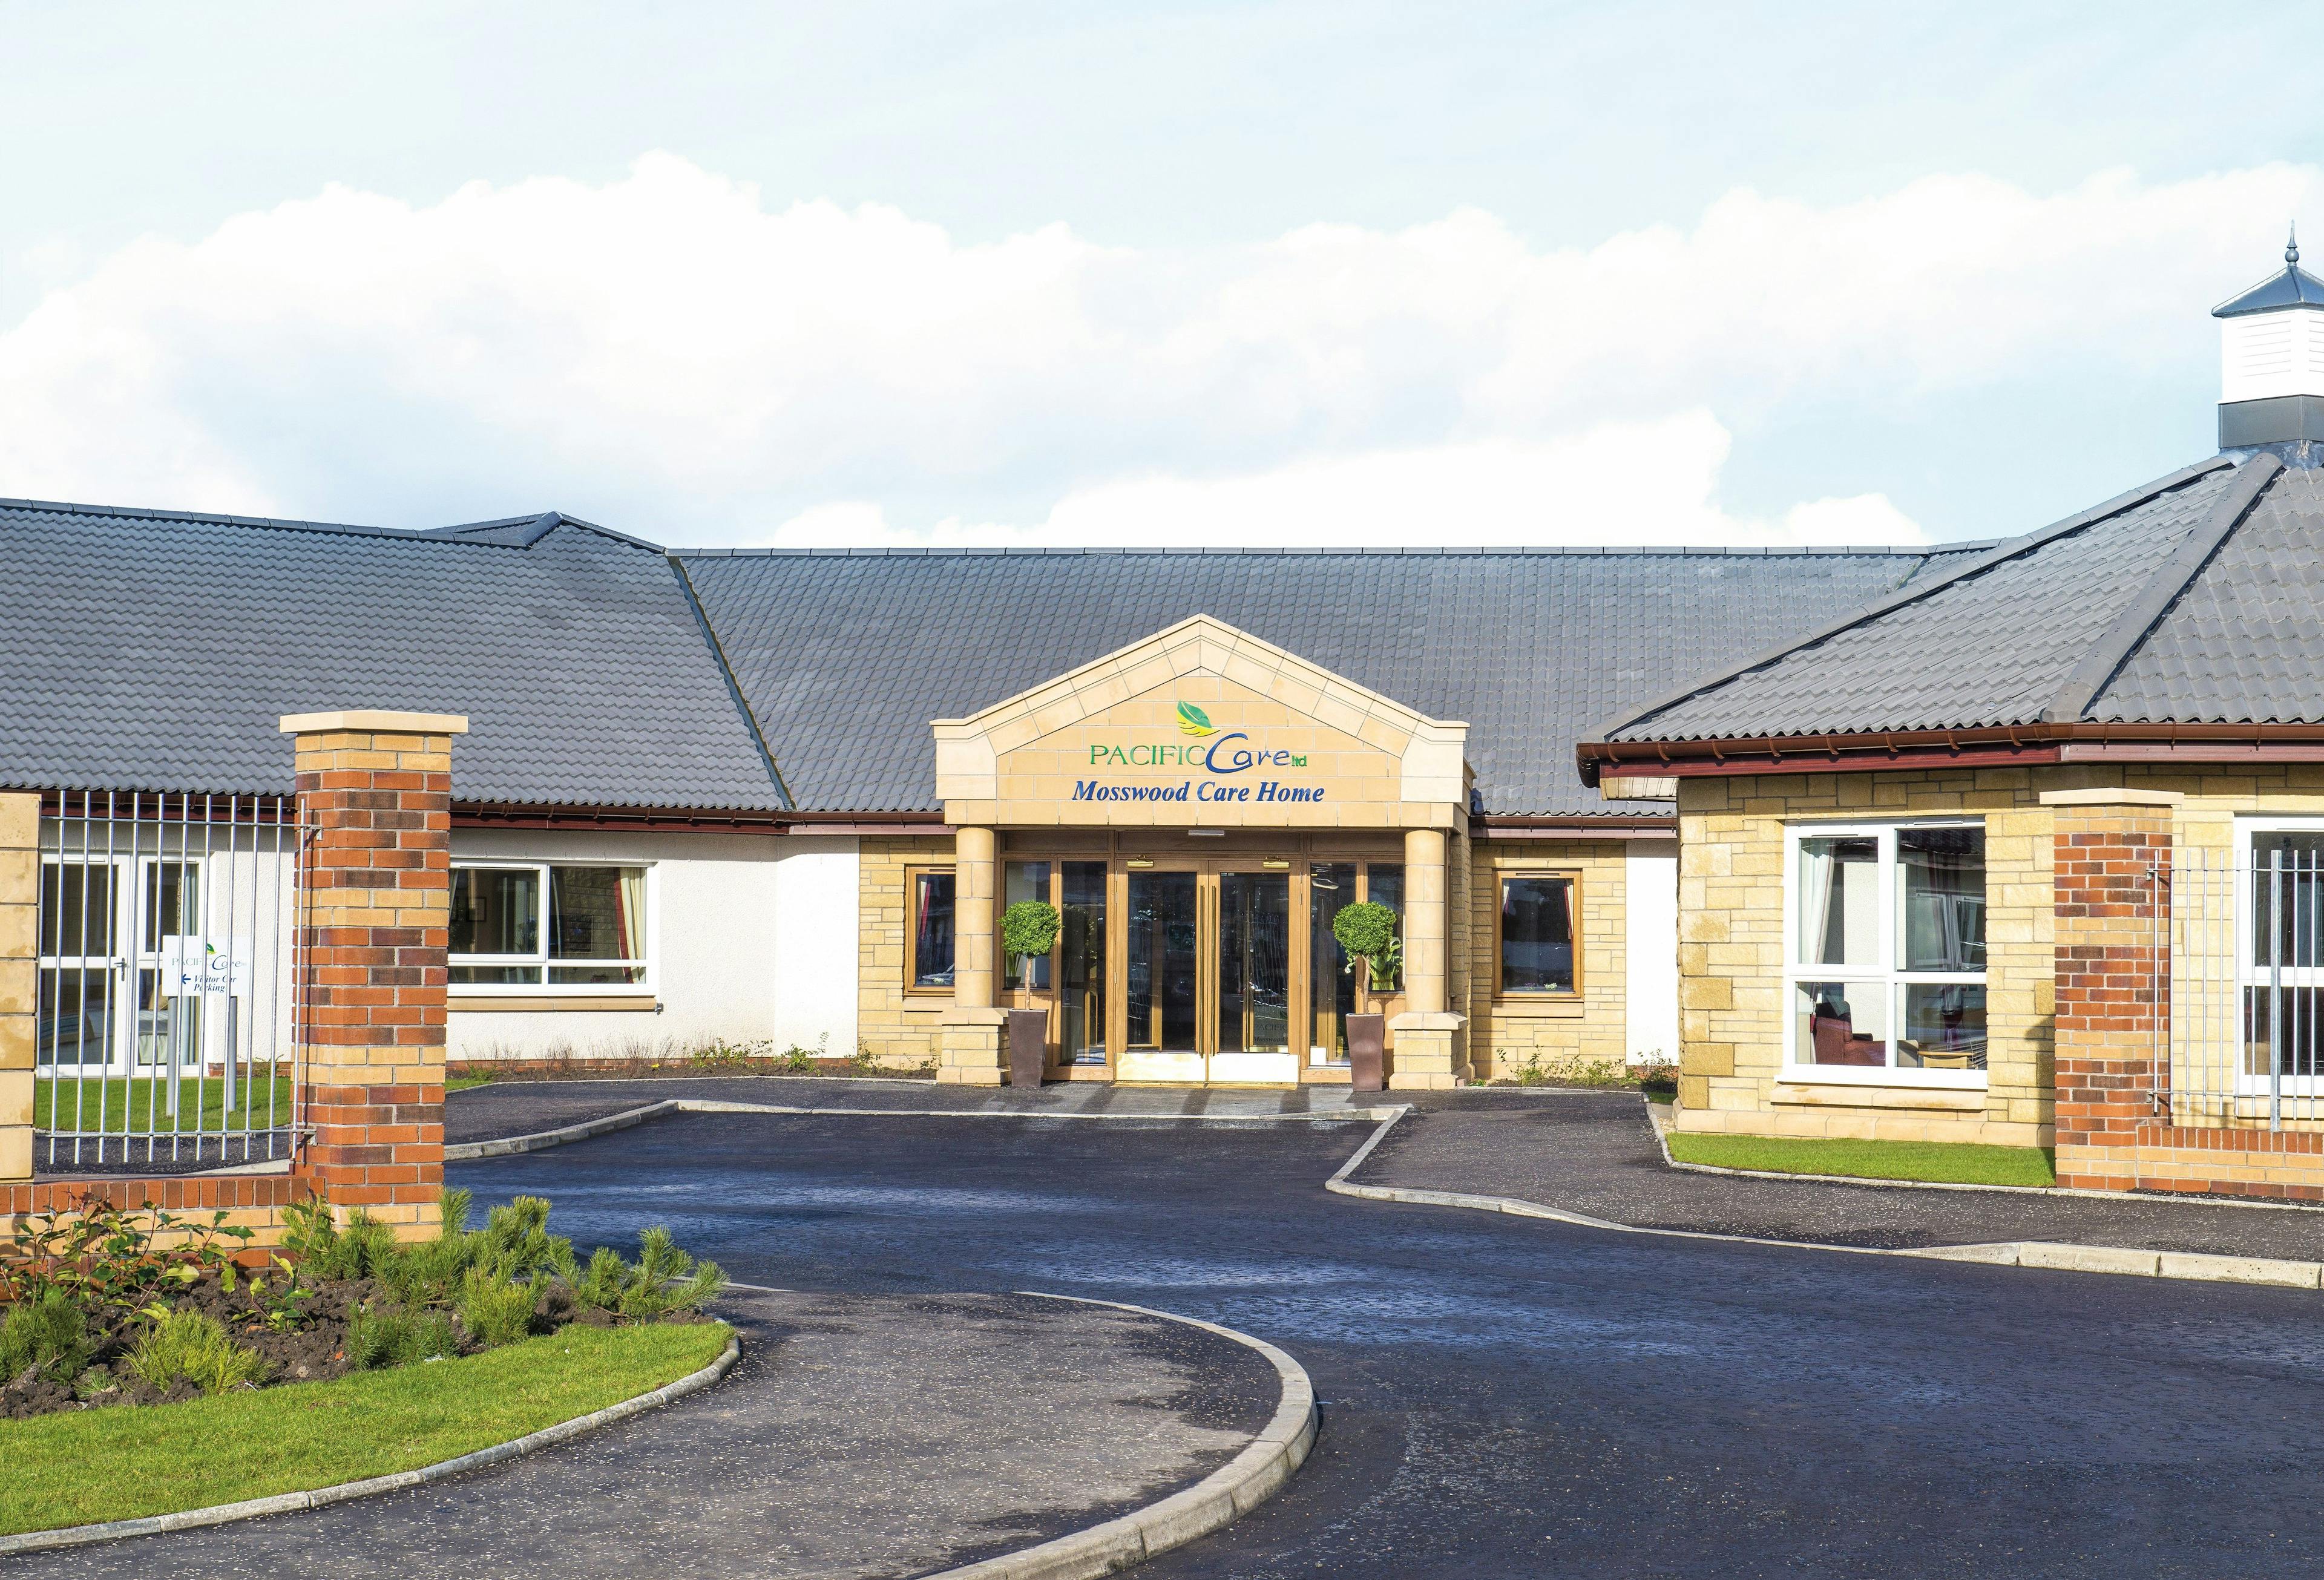 Mosswood Care Home in Paisley 20